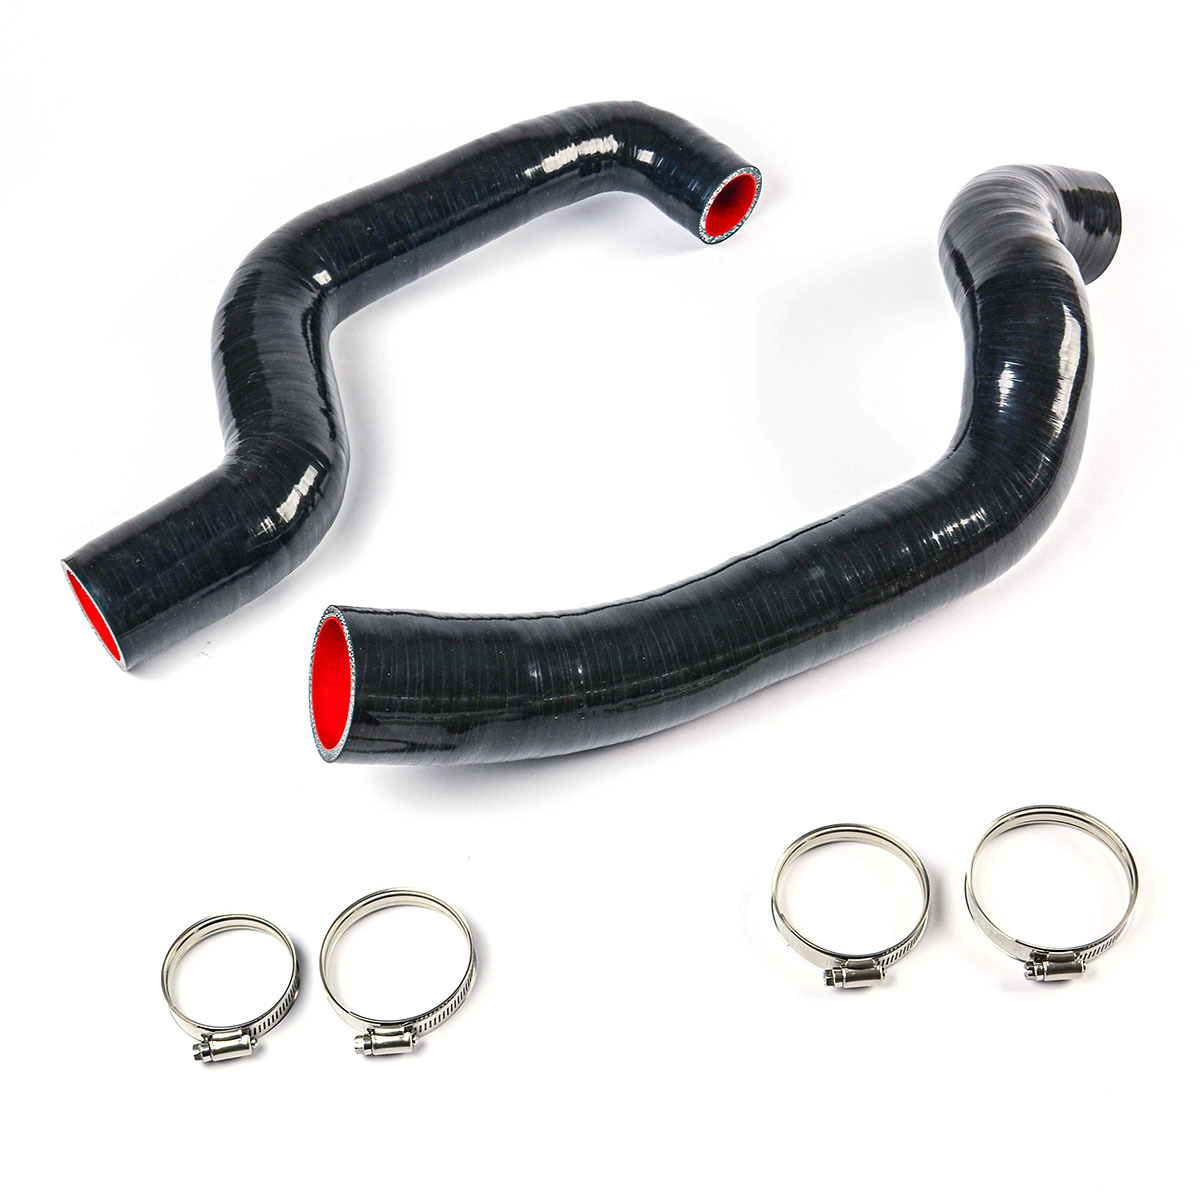 Ford Ranger/Mazda BT50 2.2L 2 Piece Silicone Hose and Clamp Intercooler Upgrade Kit 2011 -